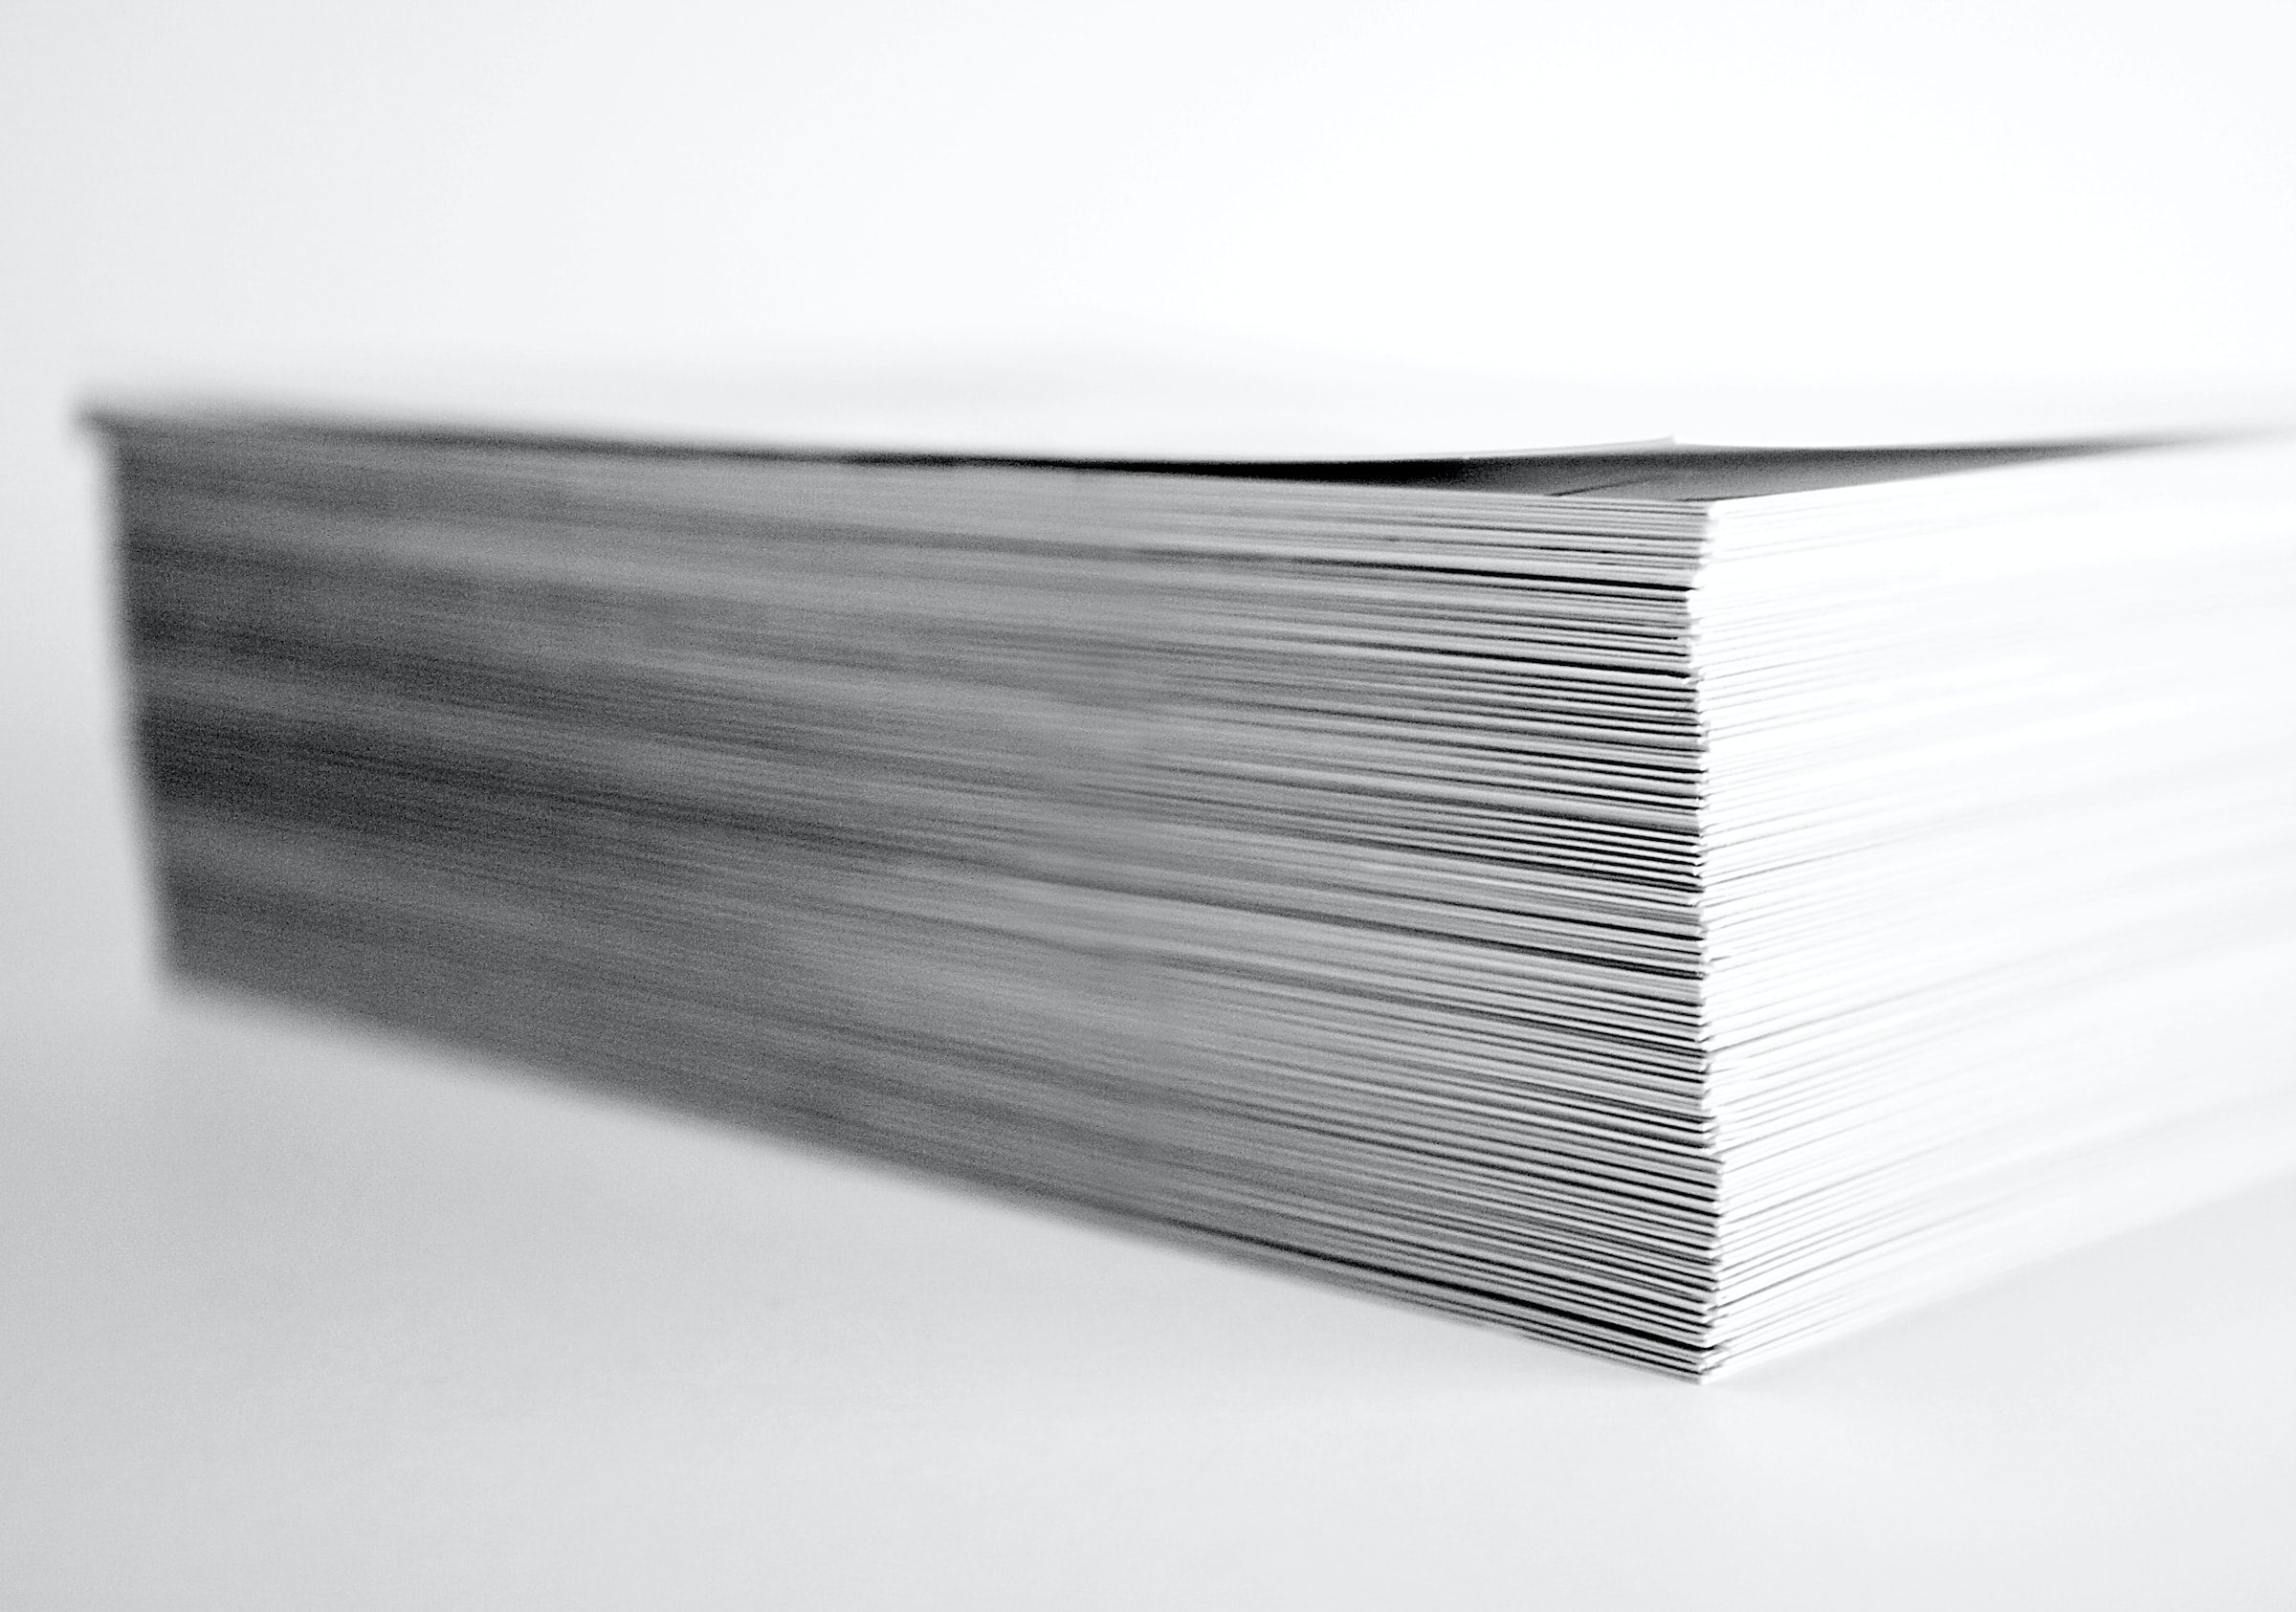 Stack of papers. Image by Ron Dyar courtesy of Unsplash.